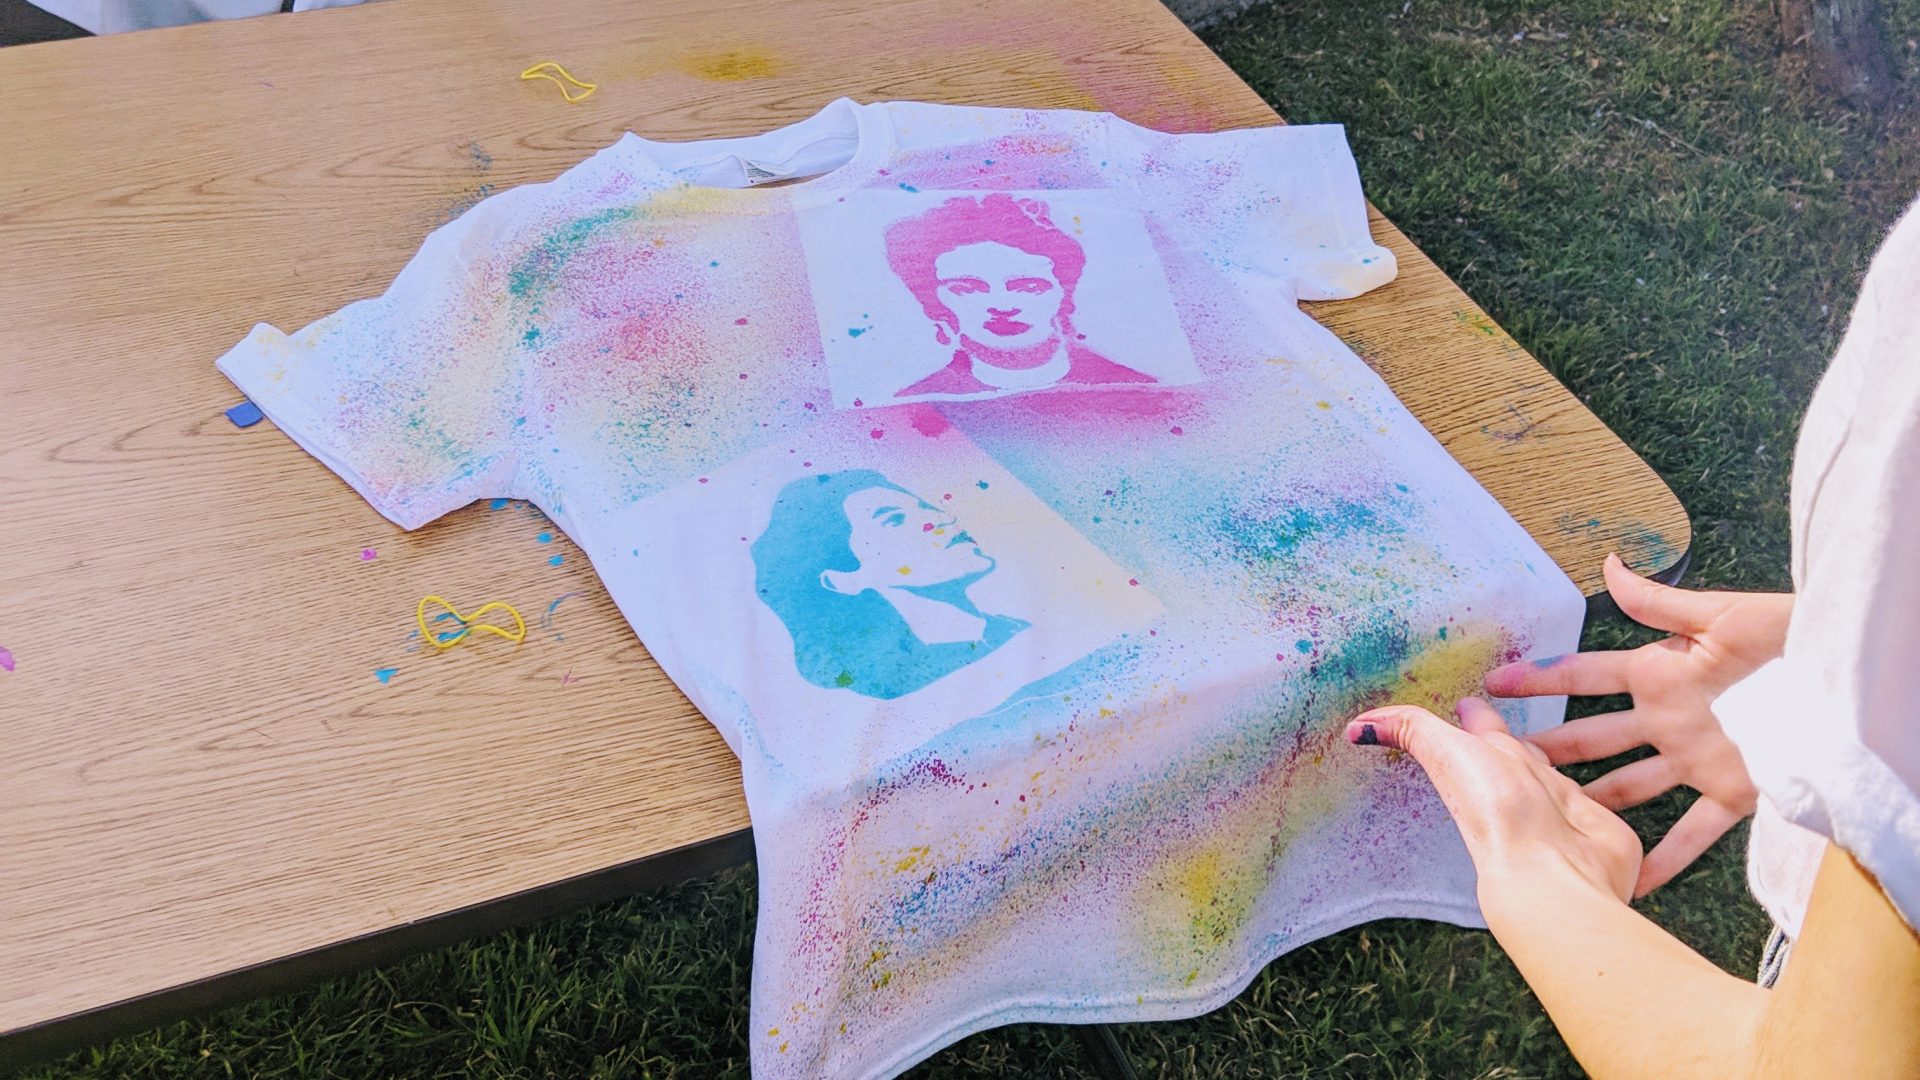 Hands holding a spraypainted stenciled shirt with Emma Tenayuca and Frida Kahlo